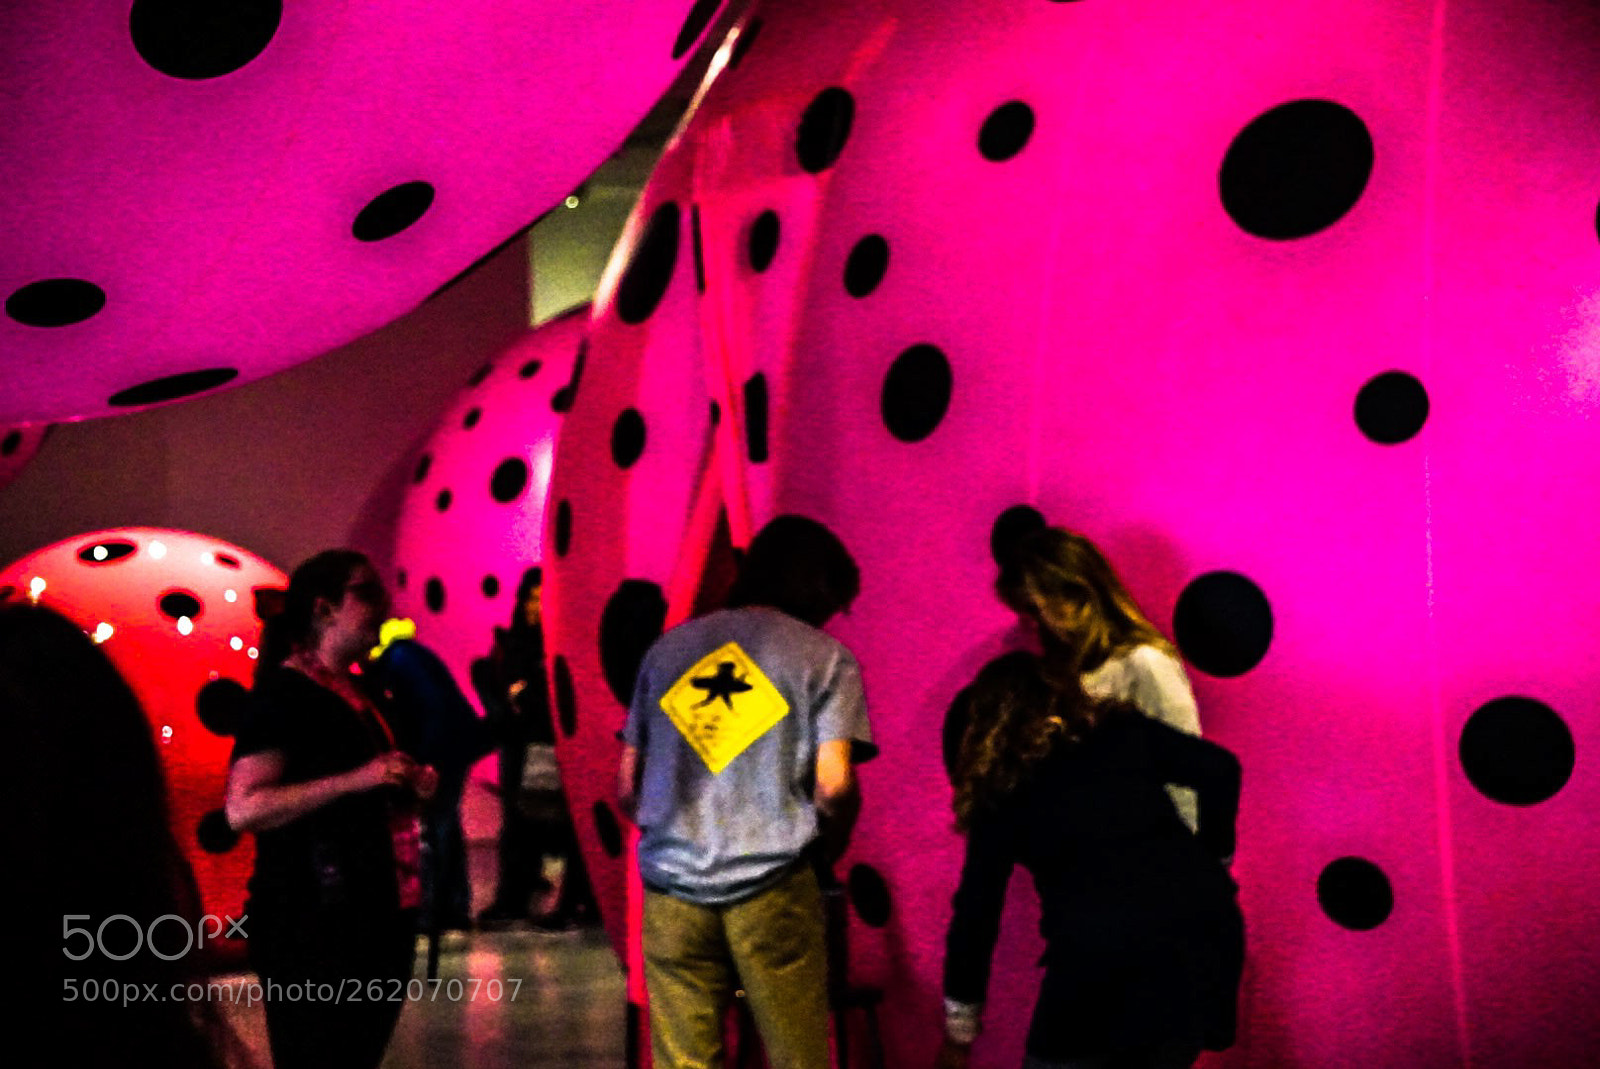 Sony a6000 sample photo. The crowd at kusama's photography